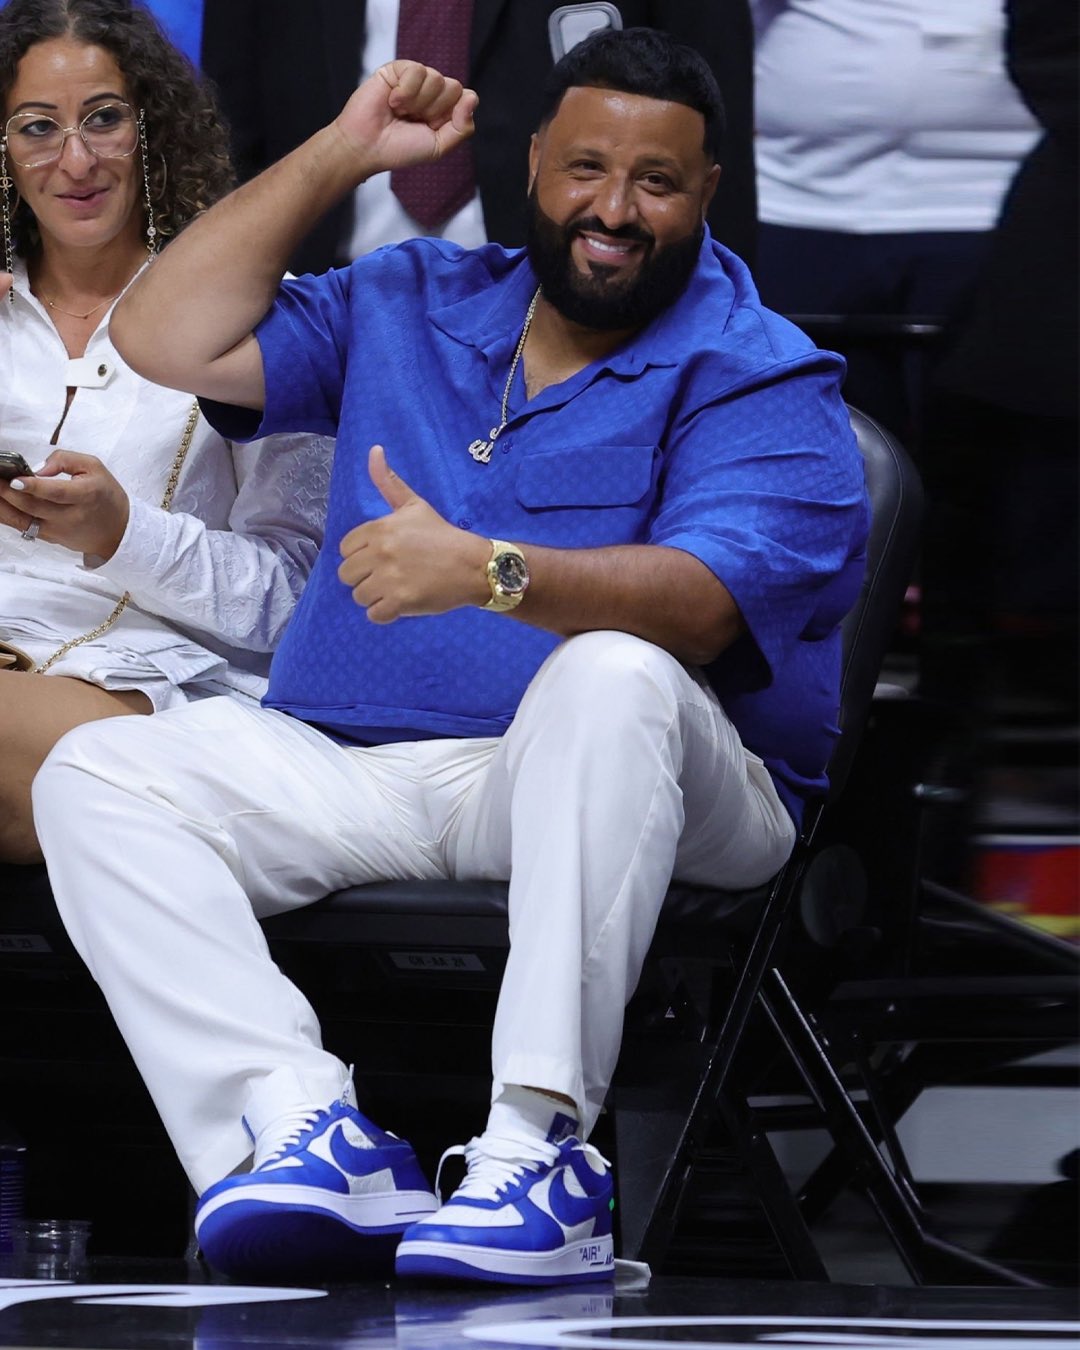 Golfer, producer, and DJ, @djkhaled brought out the blue Louis Vuitton x  Nike Air Force 1s courtside at the Miami Heat playoff game 🔥🔵